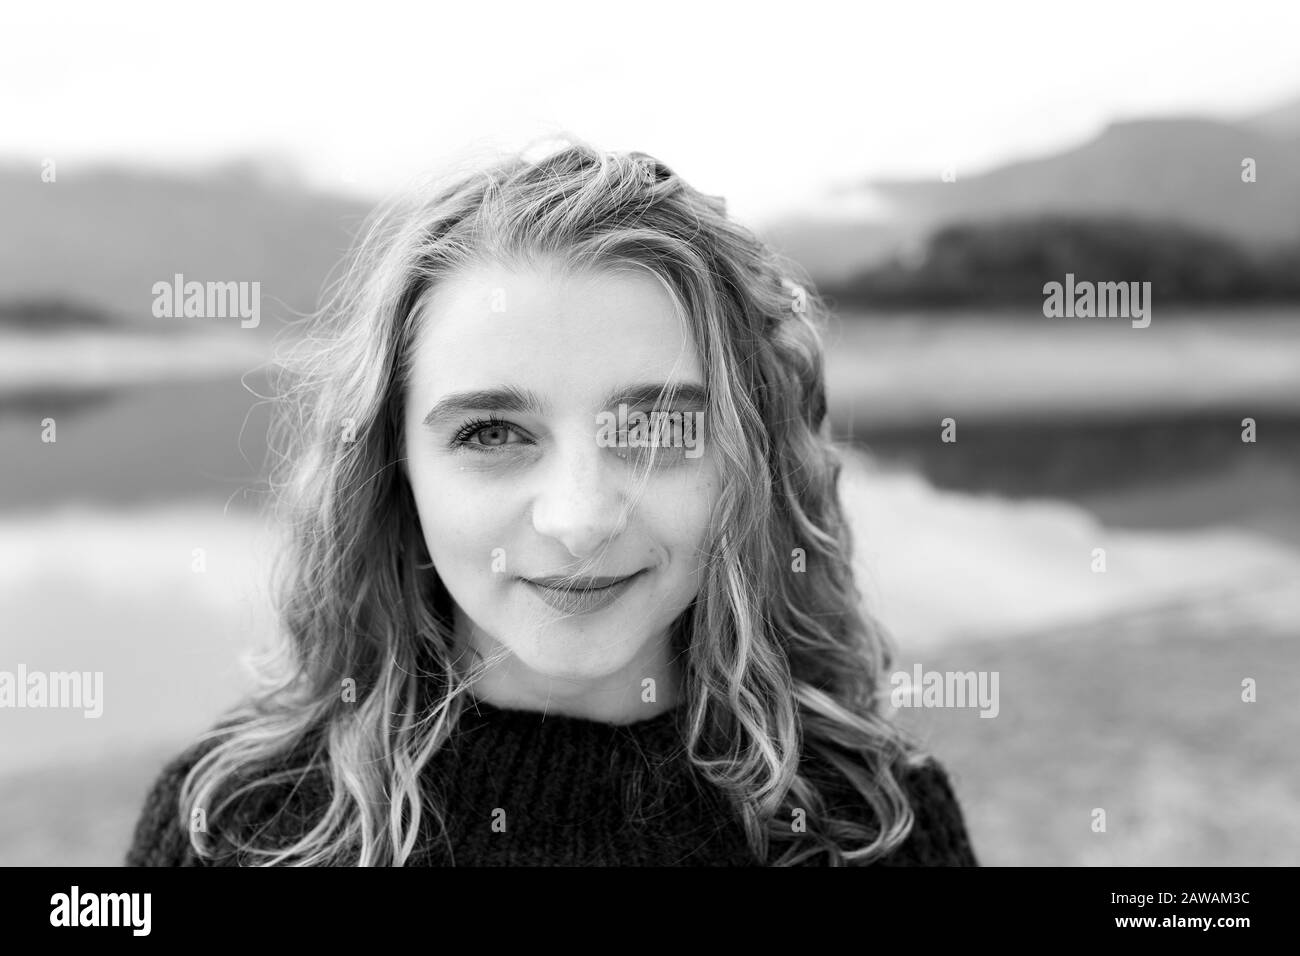 Outdoors portrait of young woman with curly hair wearing fashionable wrist watch. She is standing near lake. Stock Photo